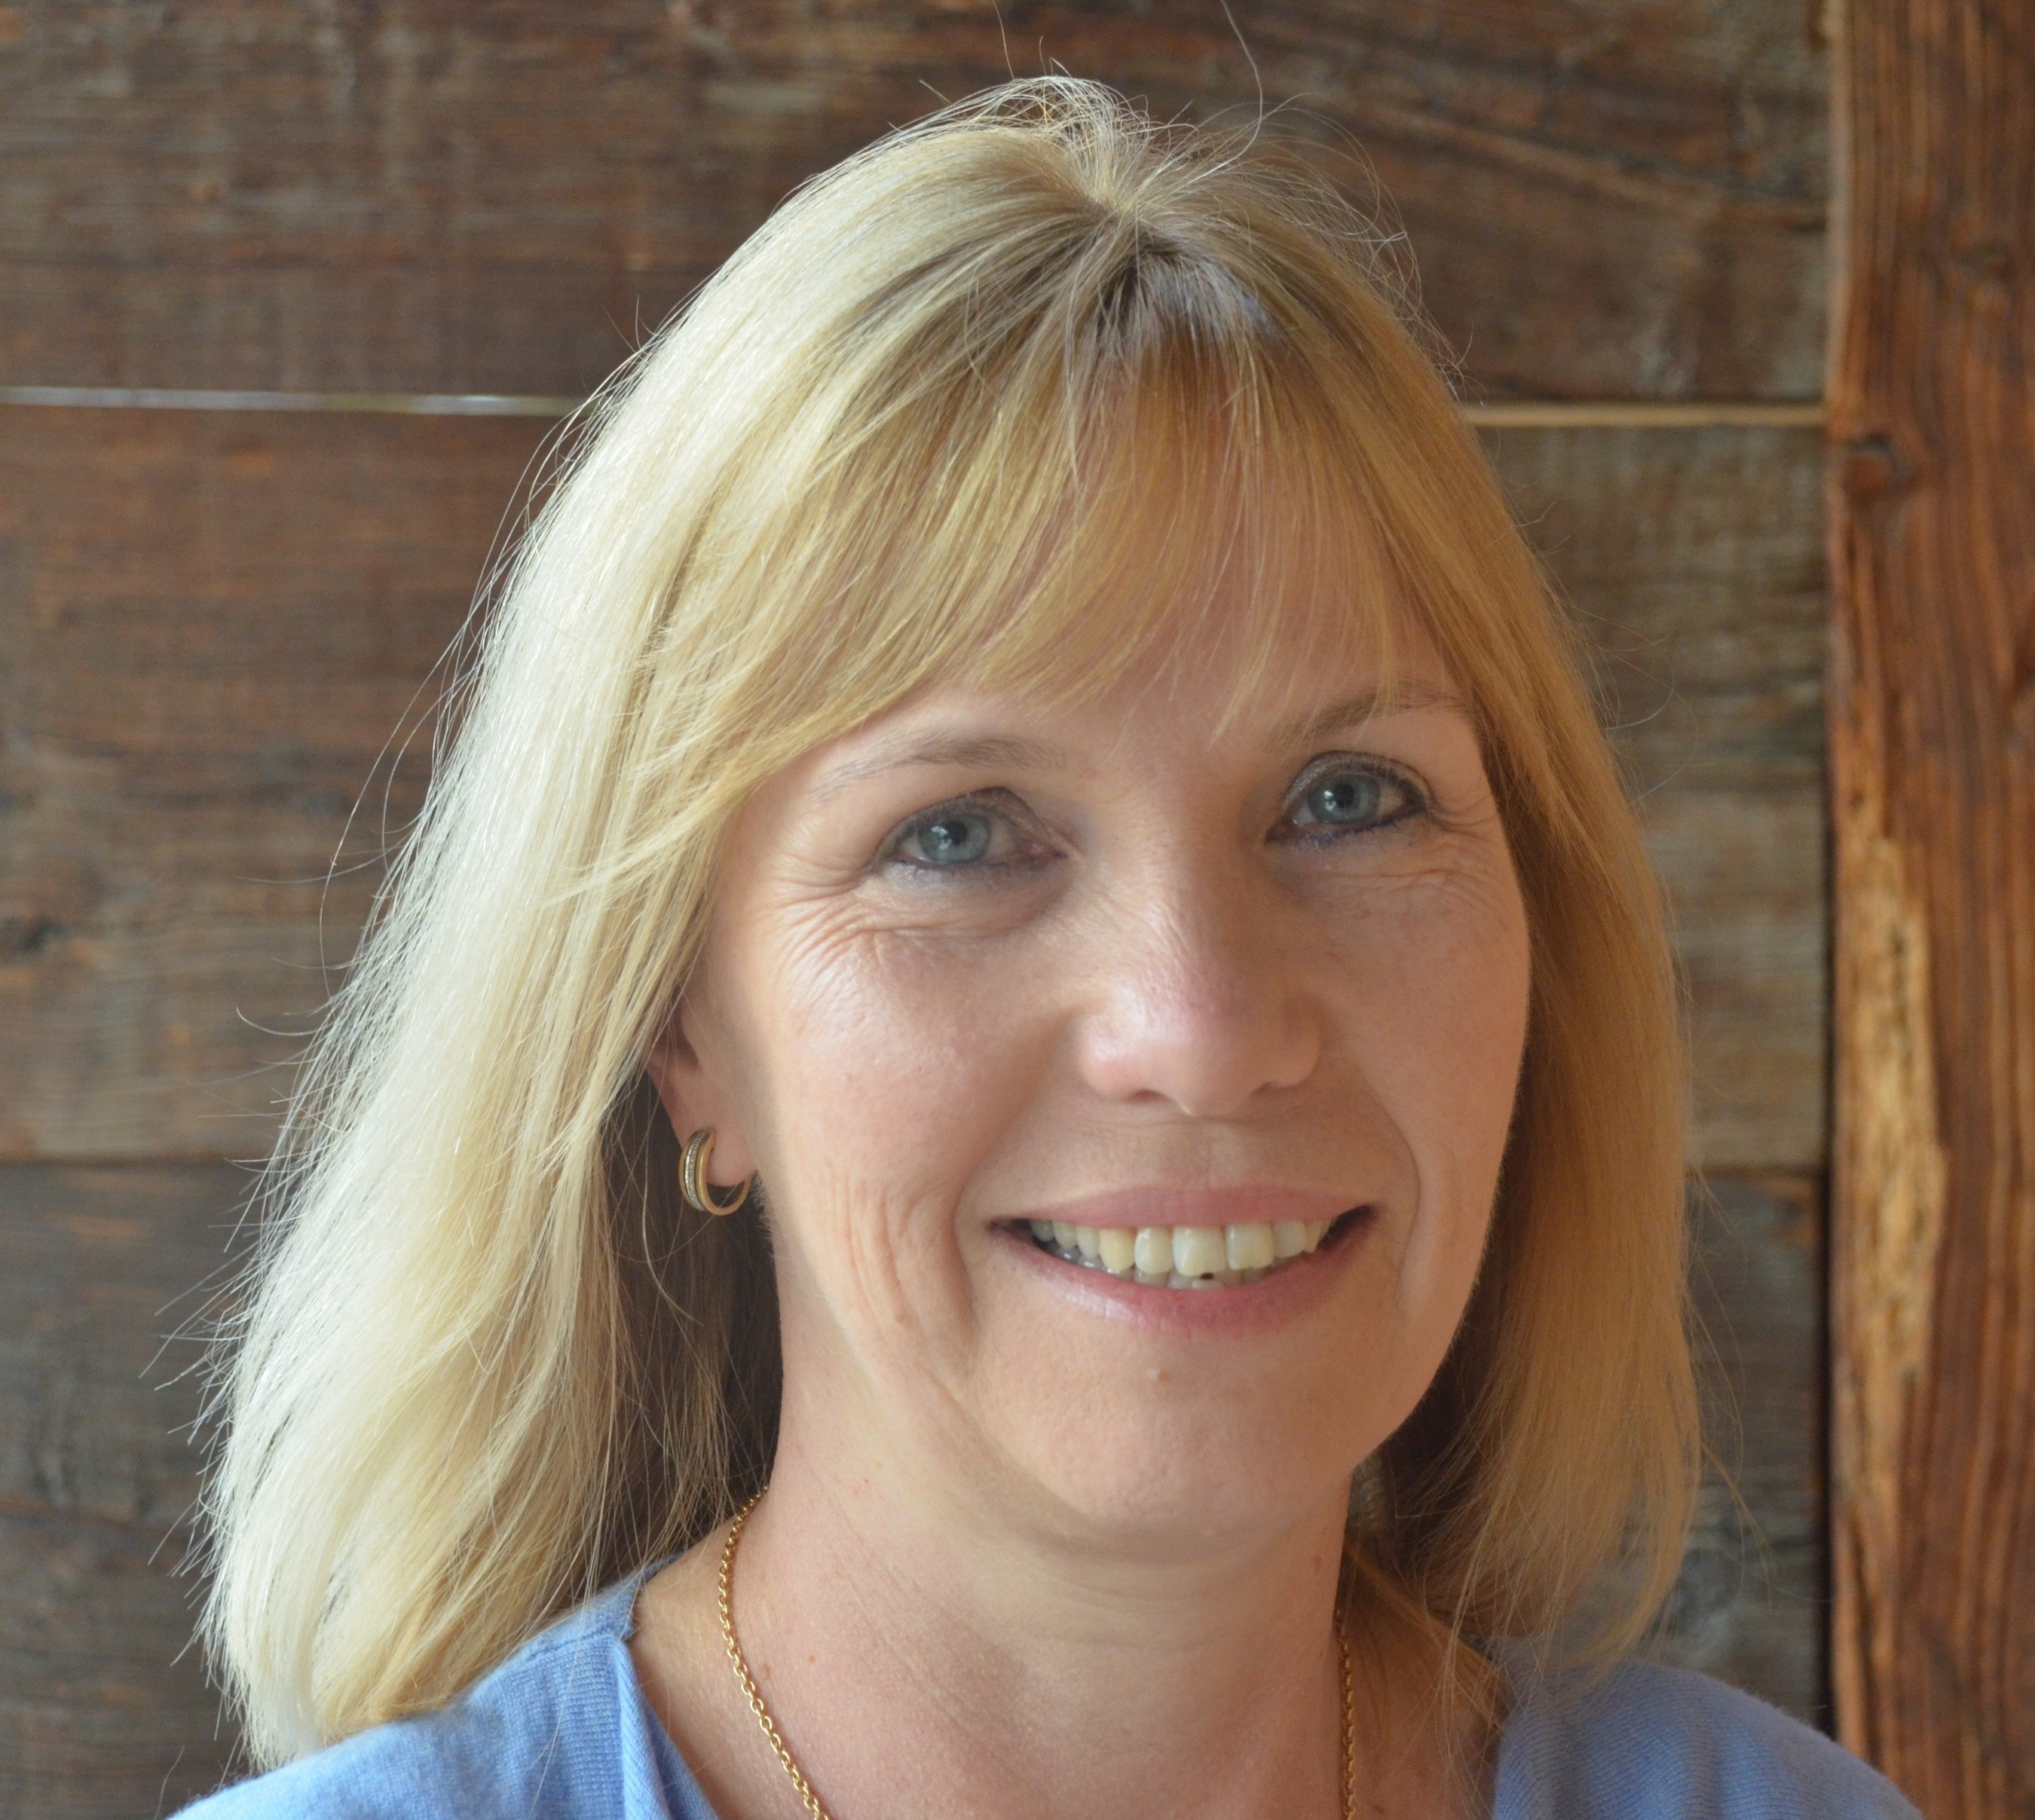 Georgina Hurst, Regional Sales Manager, EMEA - A multilingual sales leader with 22 years of experience in building and accelerating sales across EMEA, Georgina joins APTARE in the U.K. to lead its business across Europe.